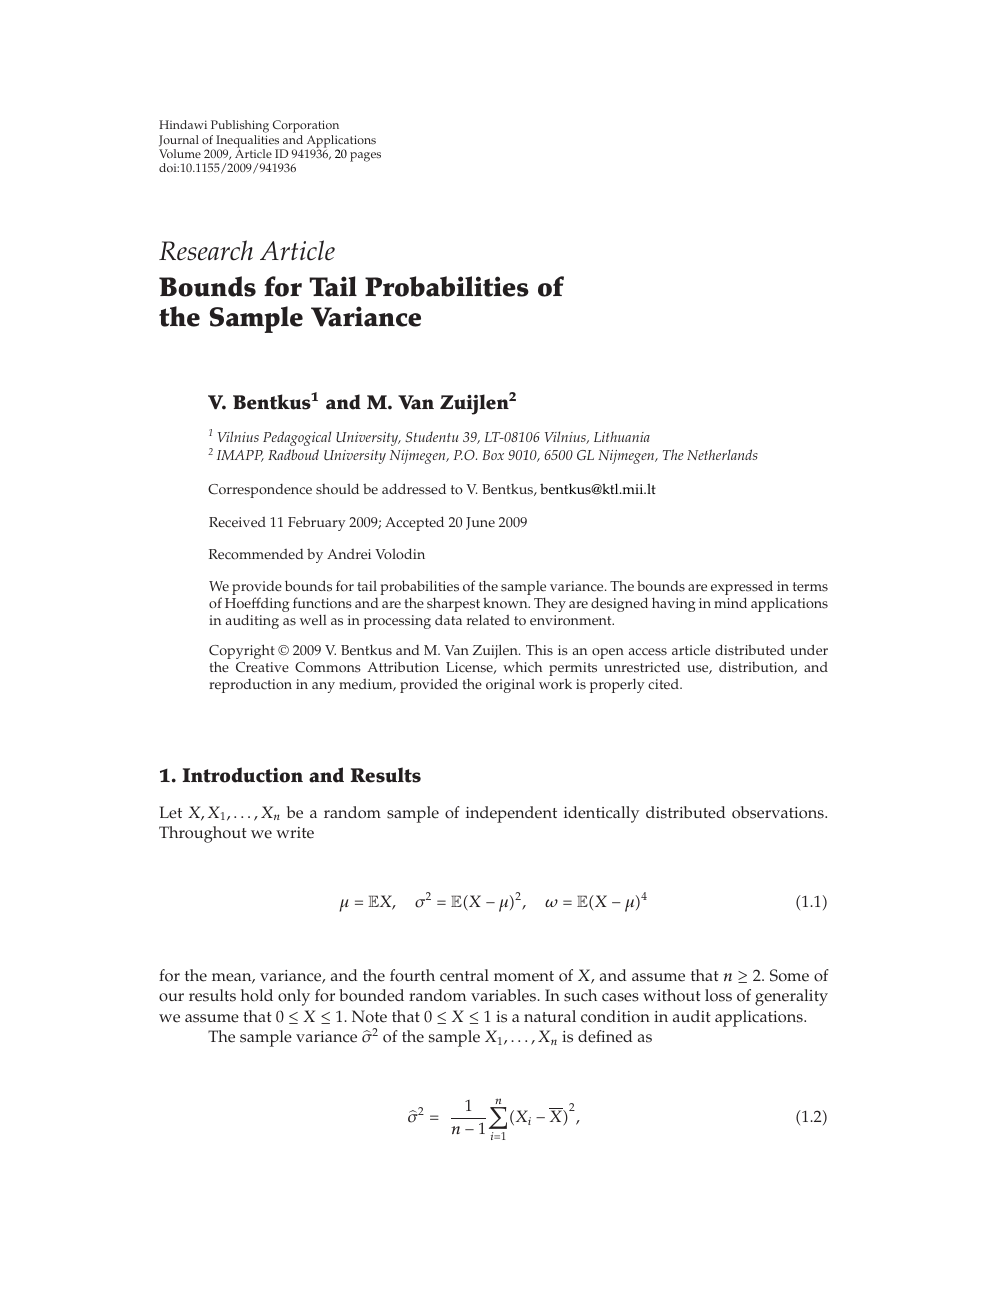 Bounds For Tail Probabilities Of The Sample Variance Topic Of Research Paper In Mathematics Download Scholarly Article Pdf And Read For Free On Cyberleninka Open Science Hub